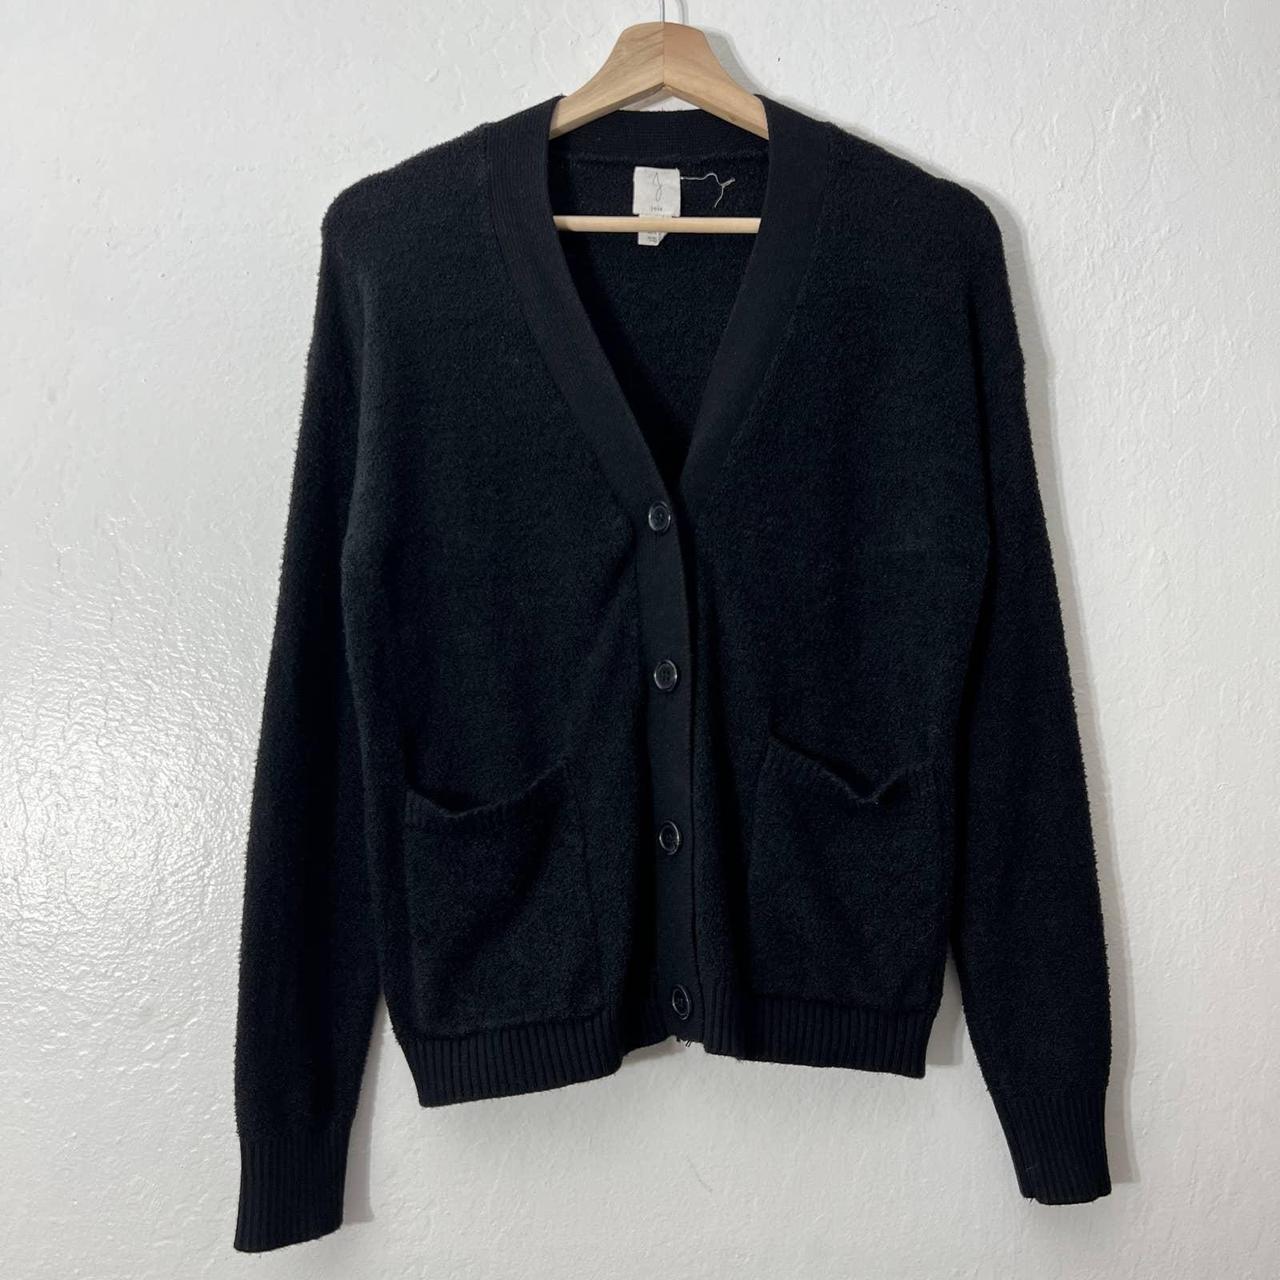 Joie SMALL Black Boucle Knit Cardigan Sweater Button... - Depop